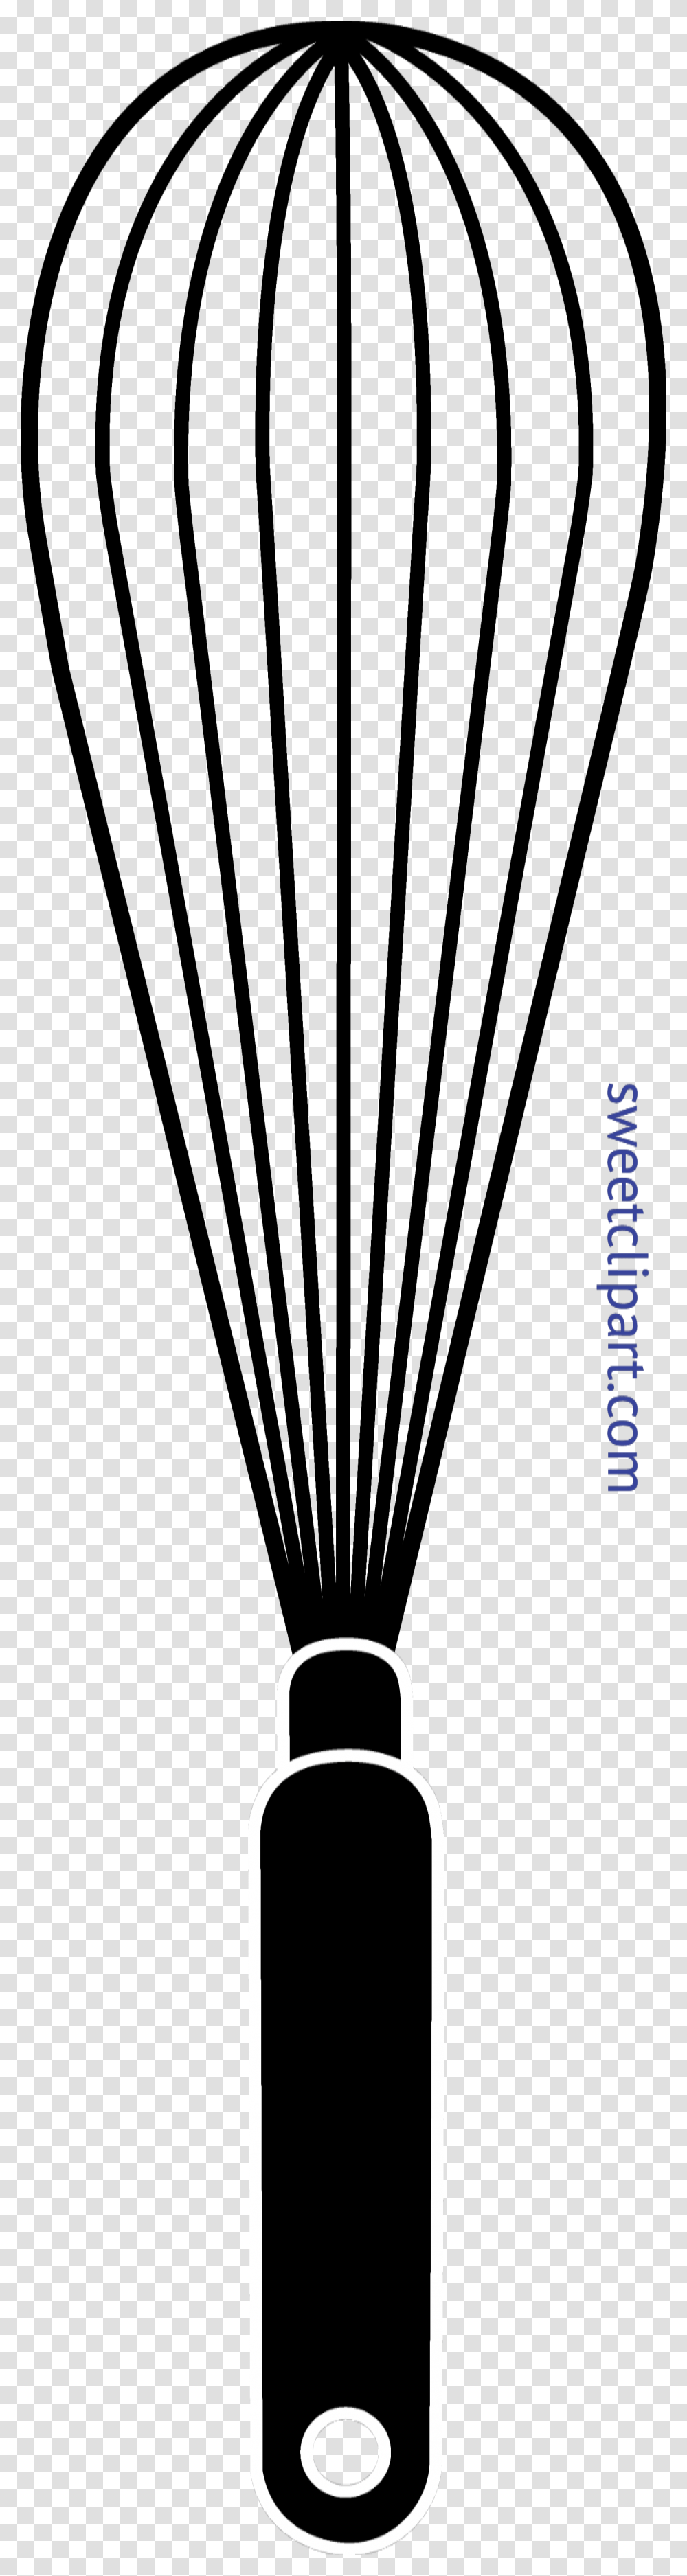 Whisk Silhouette Clip Art, Outdoors, Nature, Gray Transparent Png